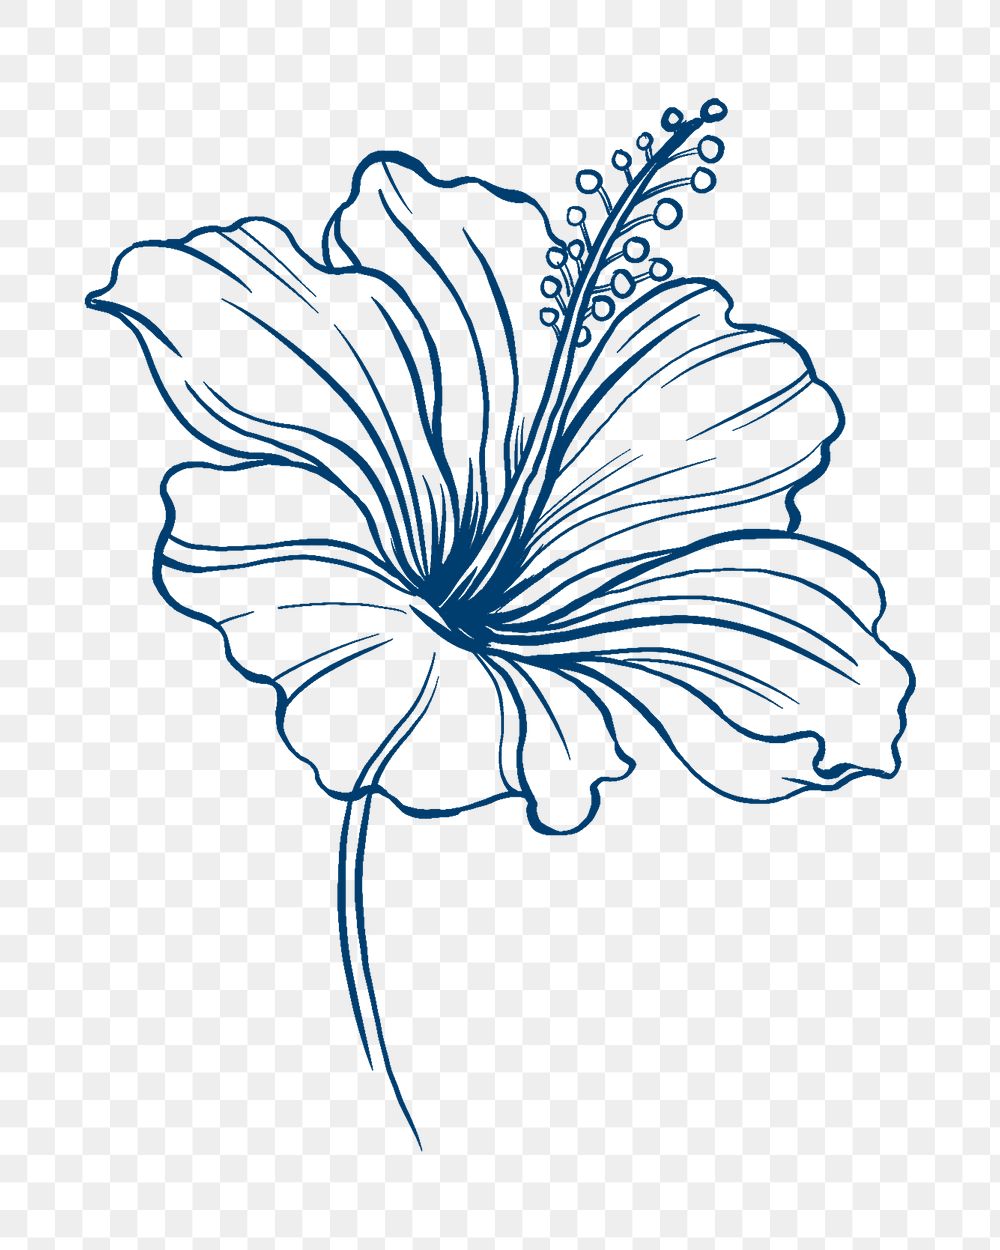 Hibiscus flower png tattoo art, blue vintage botanical cut out